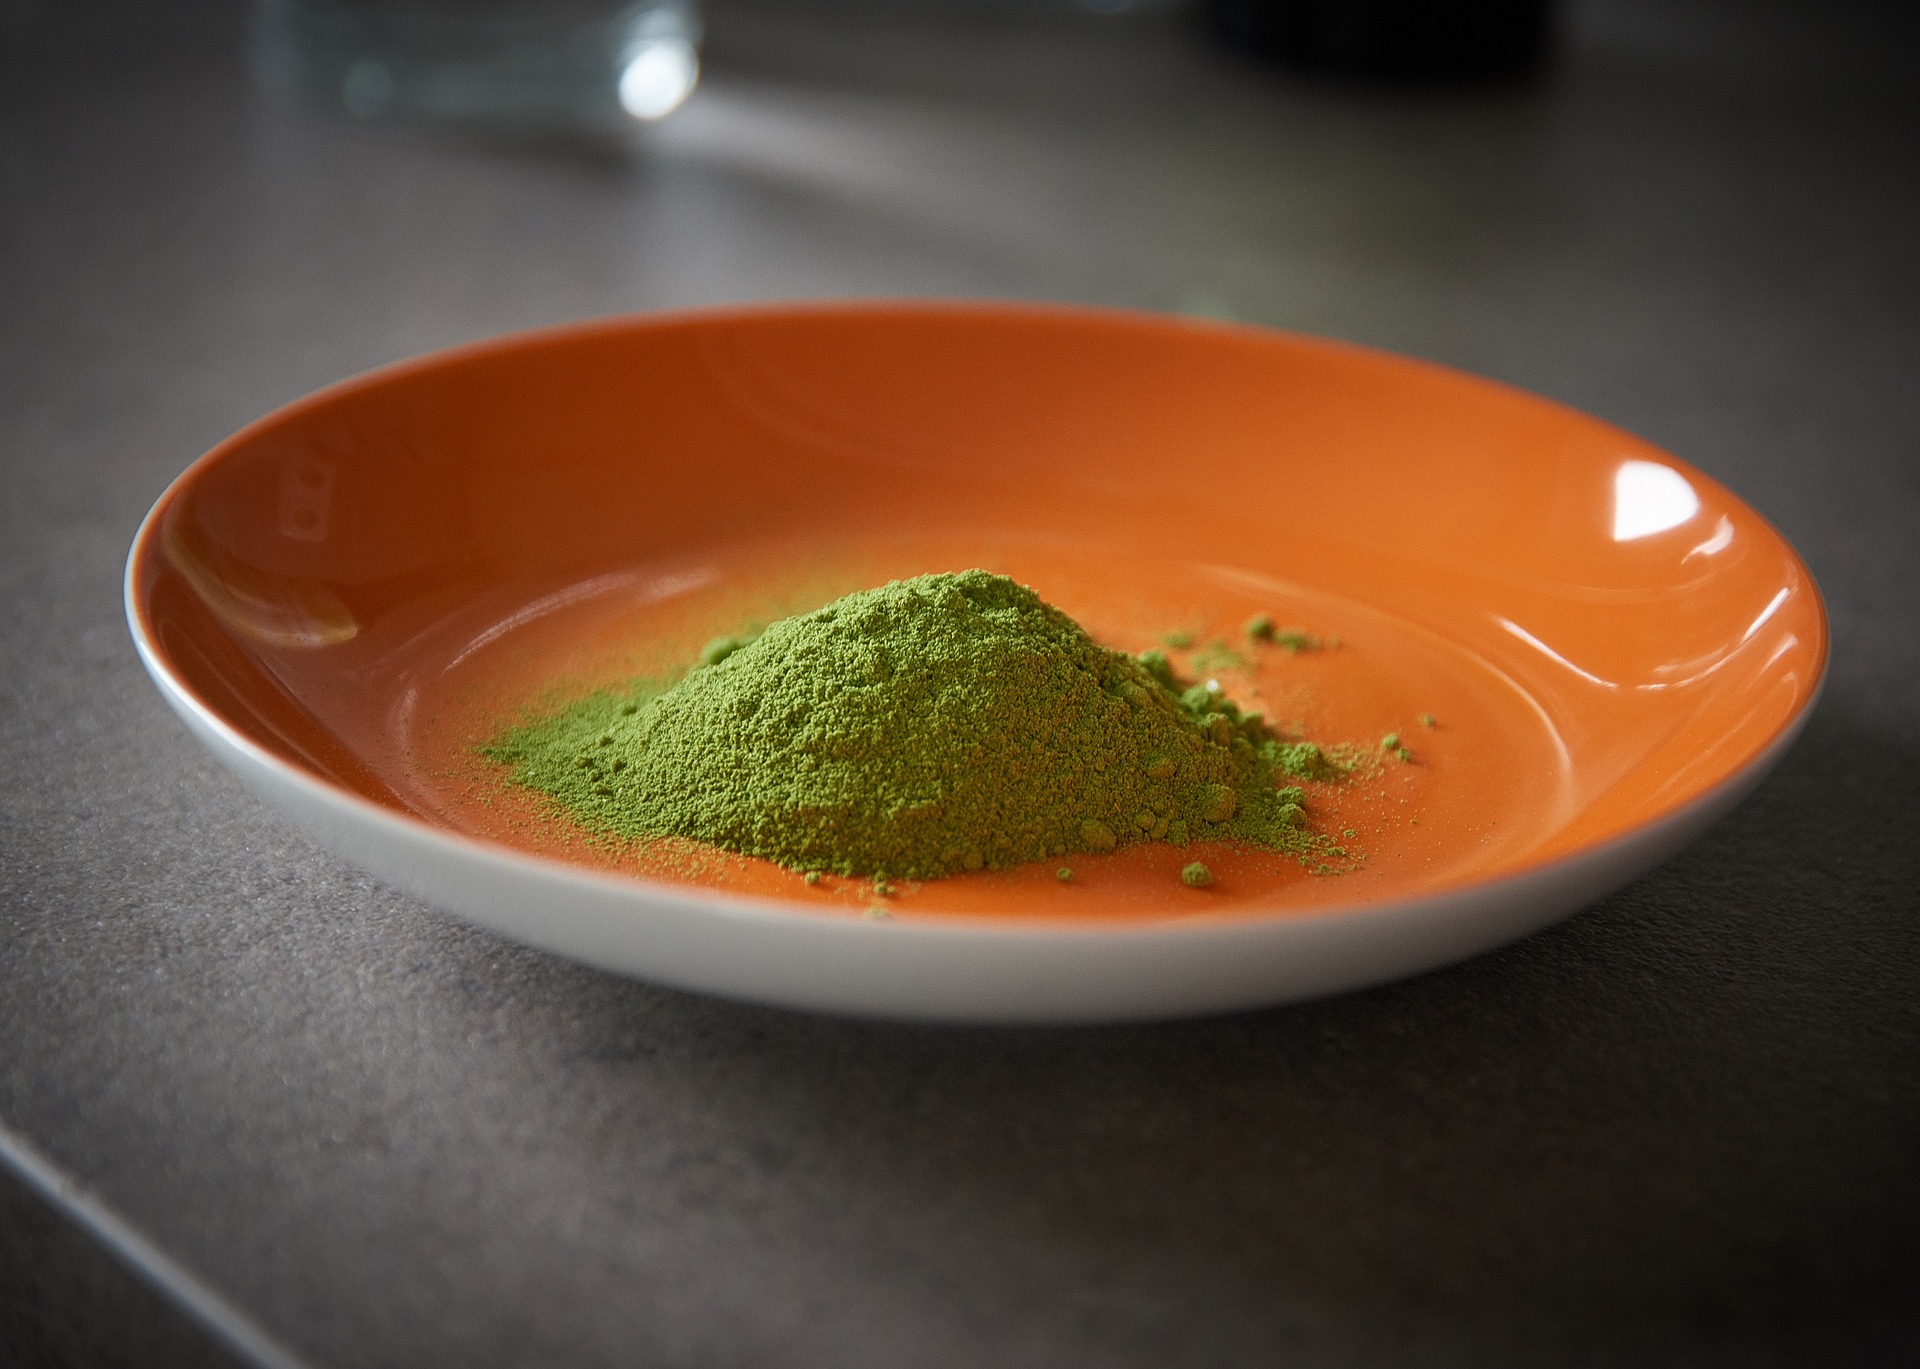 Is the Organic Moringa Powder Beneficial for Health?